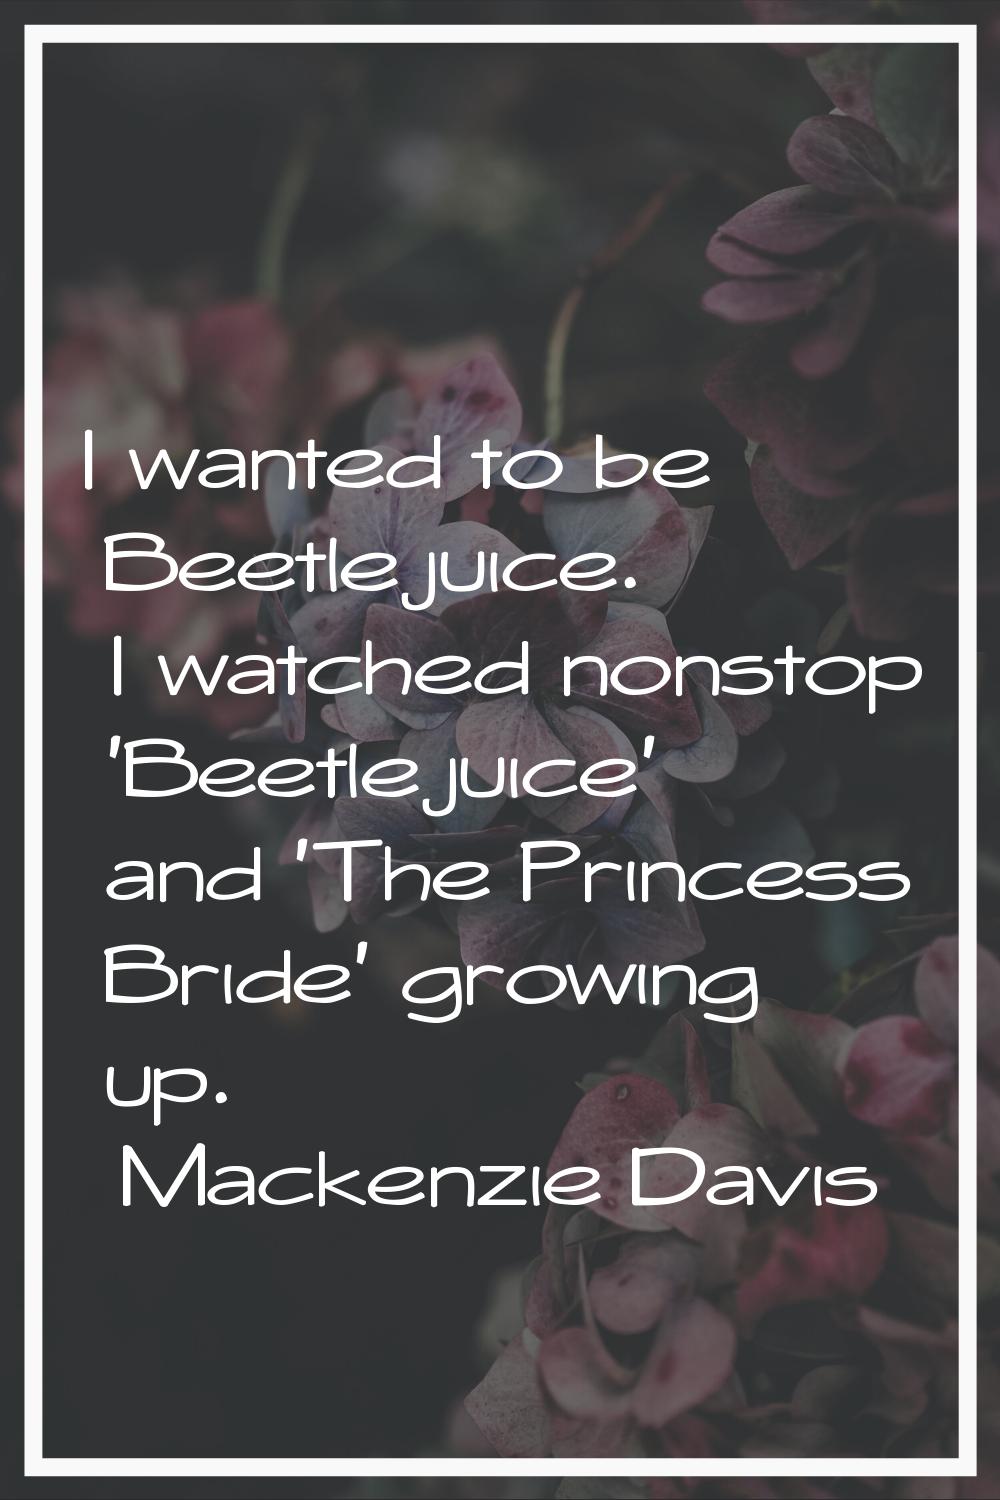 I wanted to be Beetlejuice. I watched nonstop 'Beetlejuice' and 'The Princess Bride' growing up.